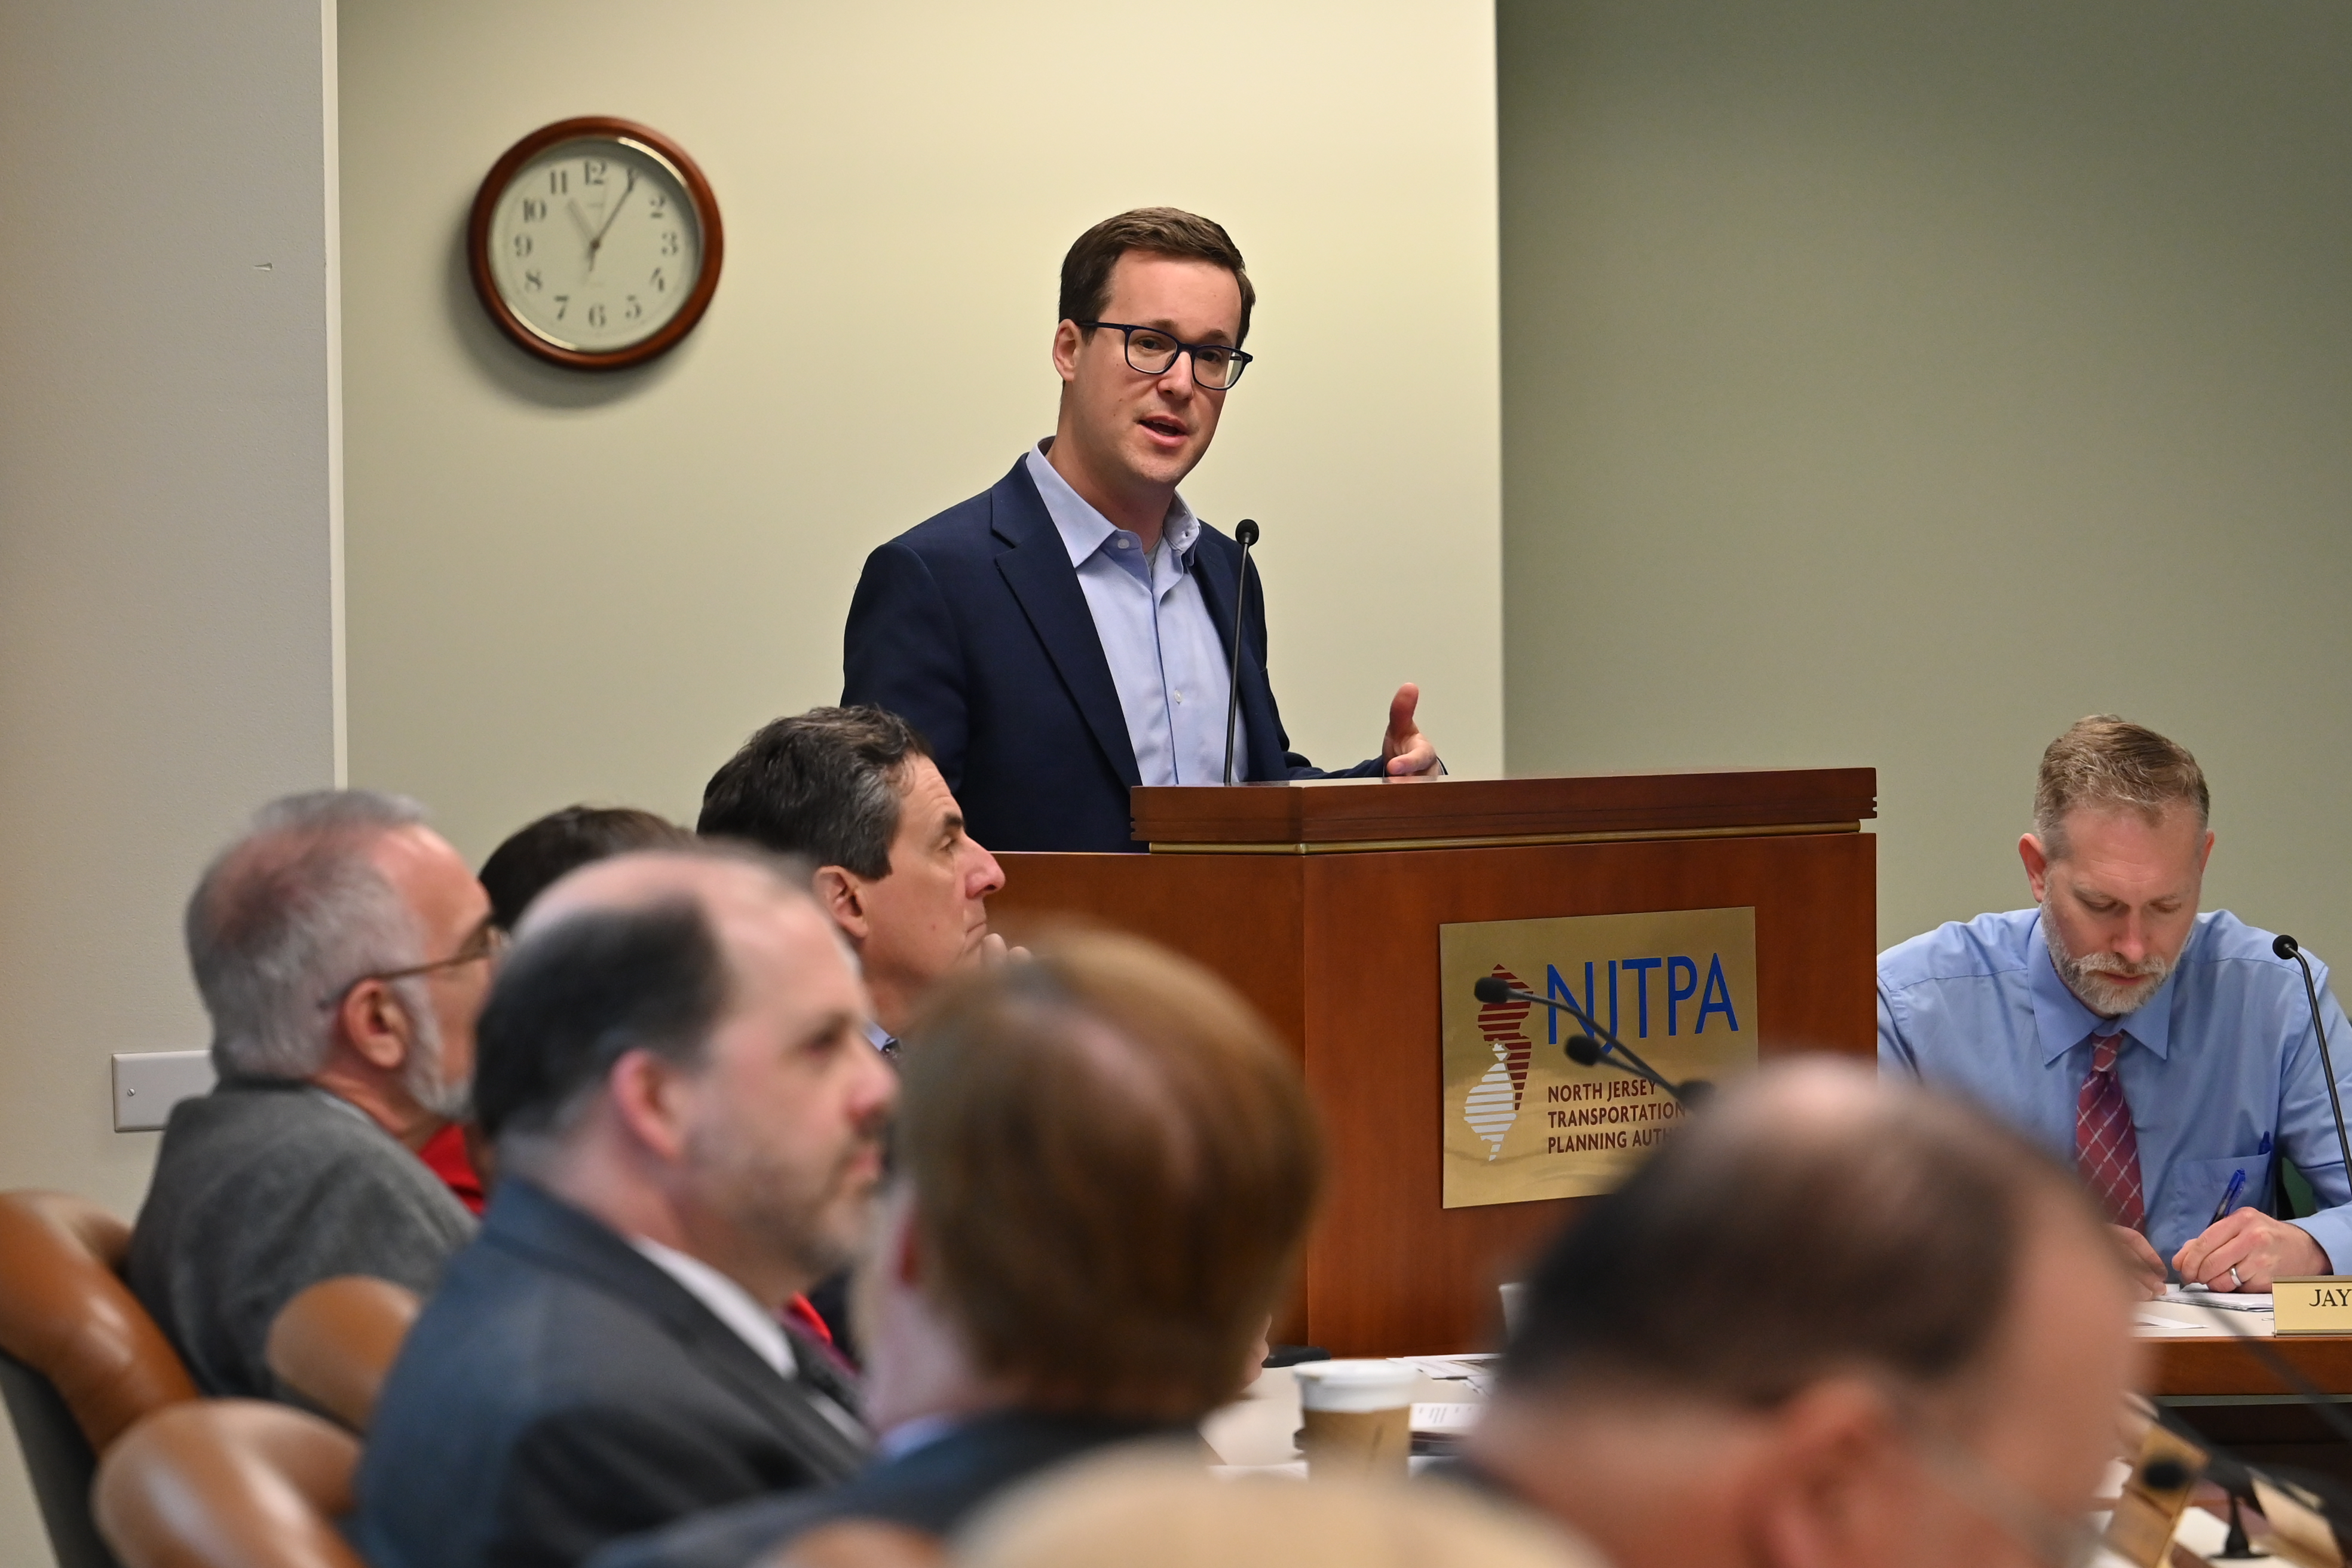 Dr. Jesse Jenkins speaks at the March 13, 2023 NJTPA Board meeting